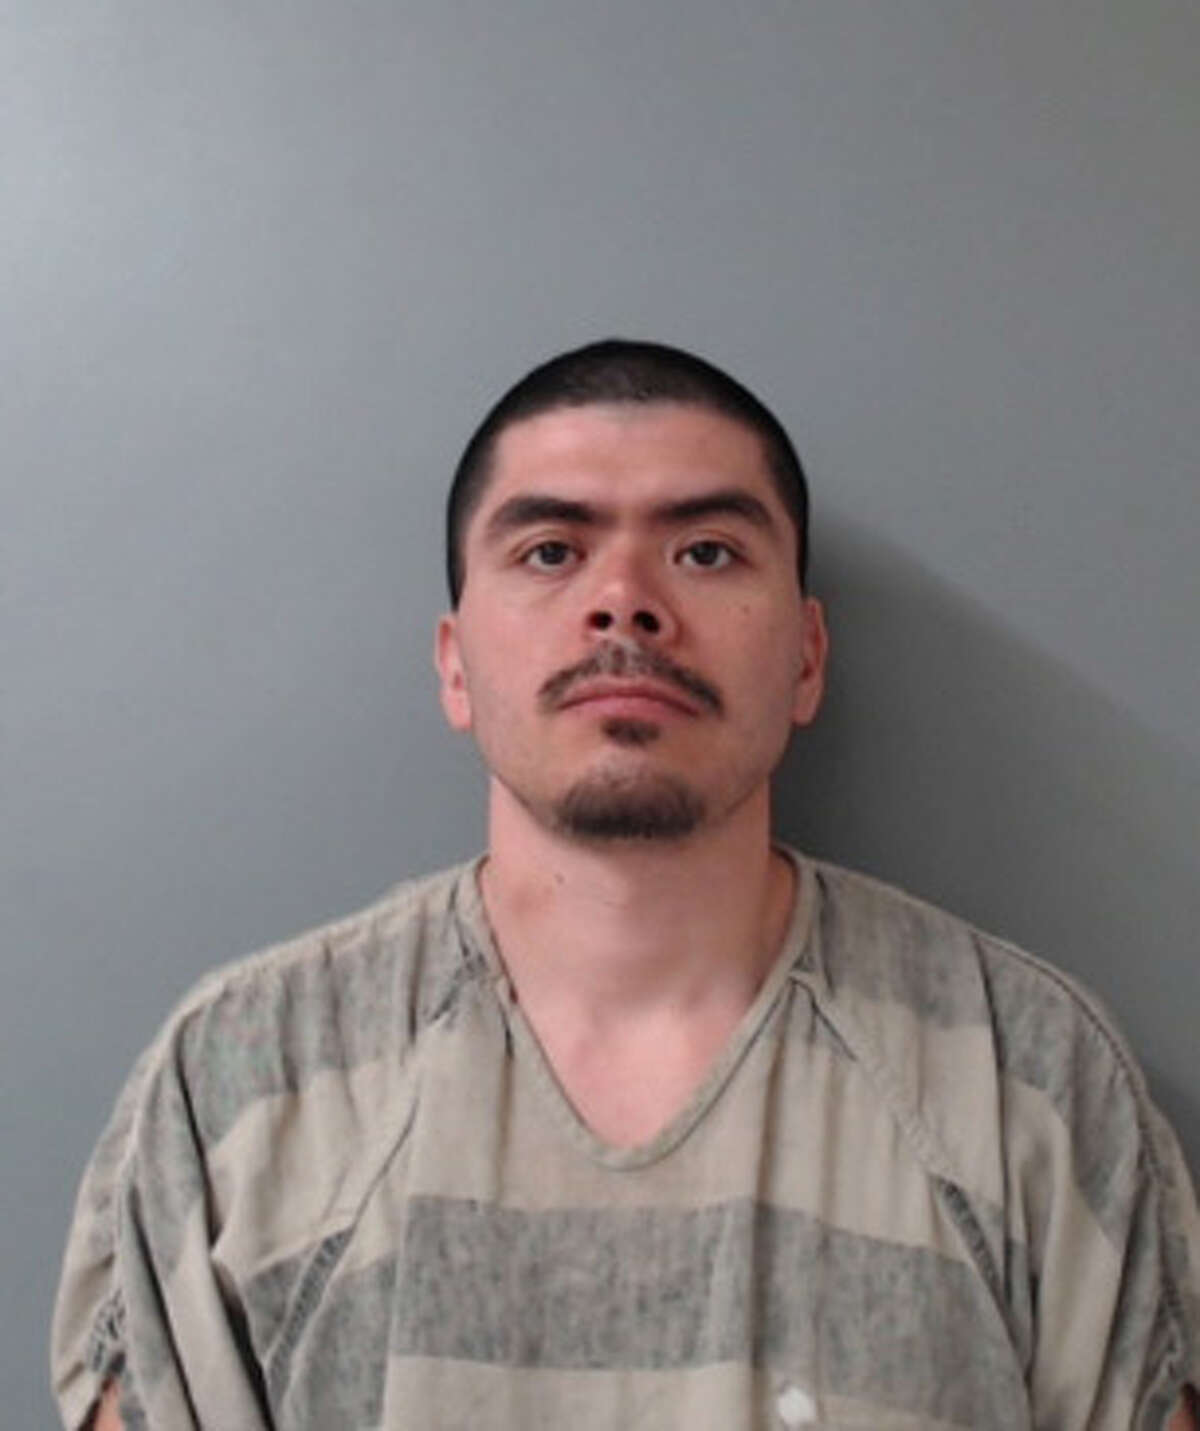 Gustavo Villegas, 32, was charged with aggravated assault of a date, family, household member with a weapon.